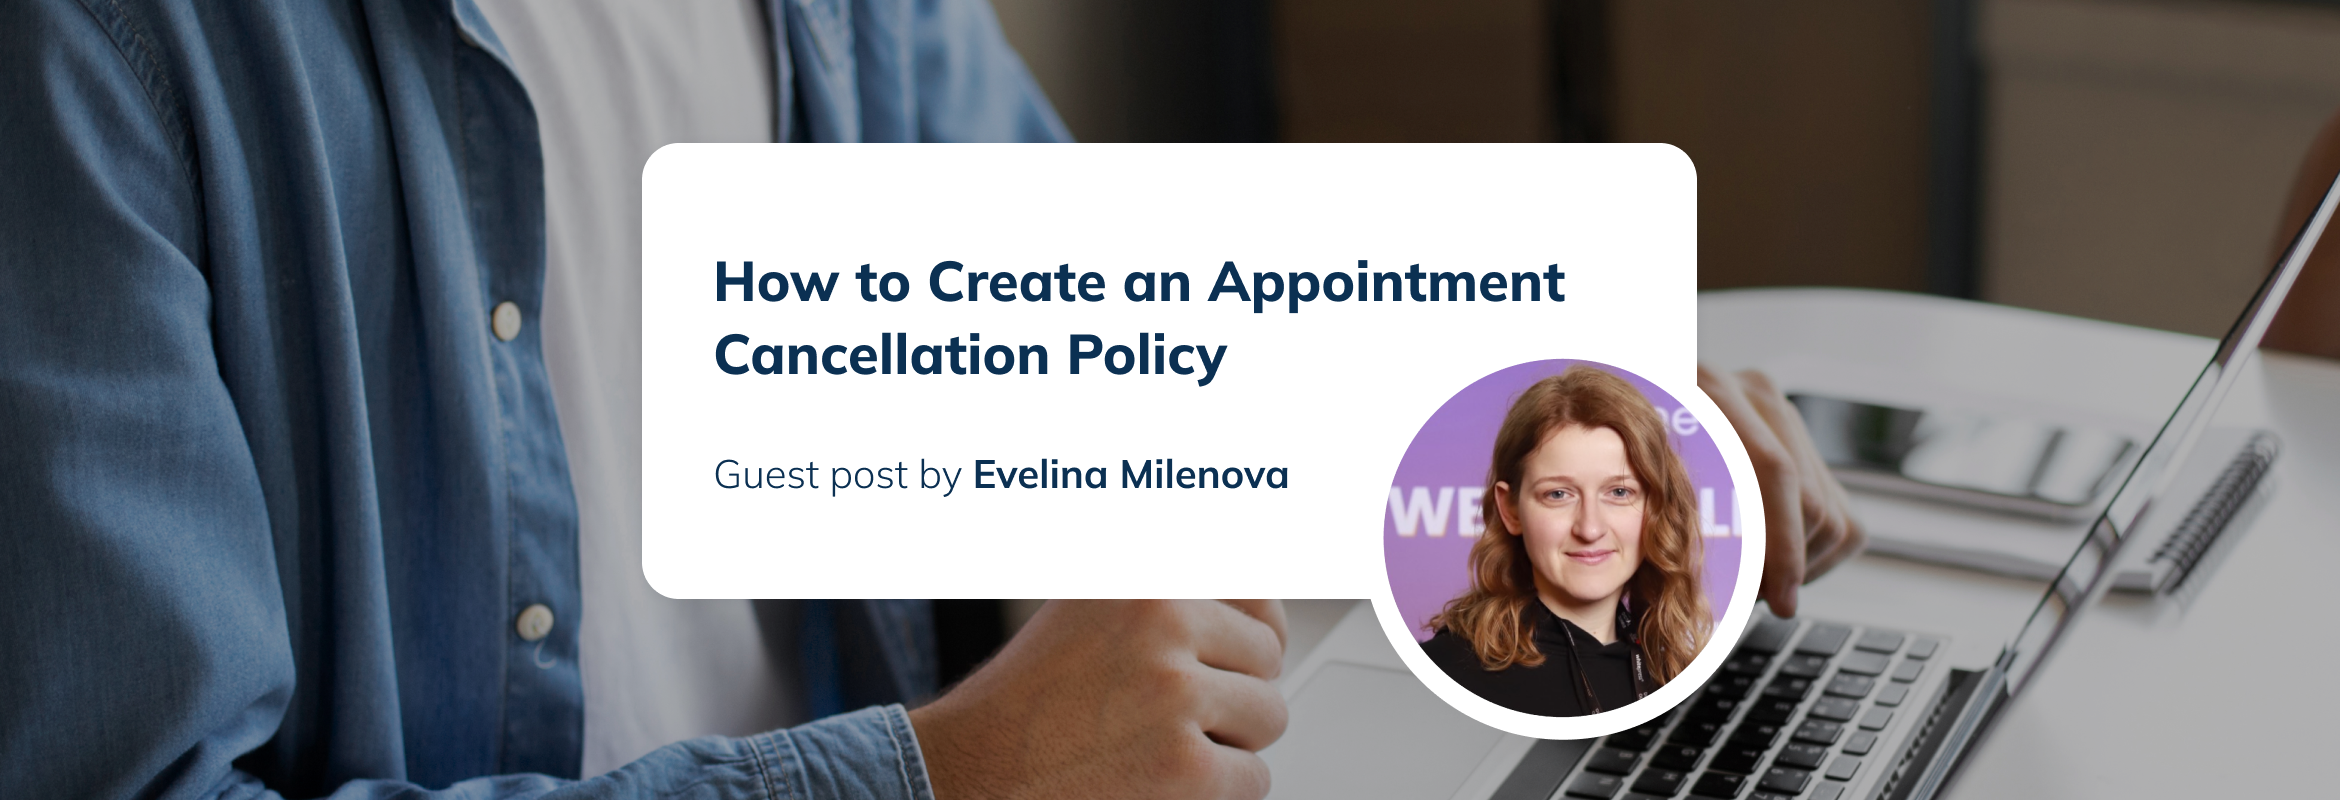 How to Create an Appointment Cancellation Policy